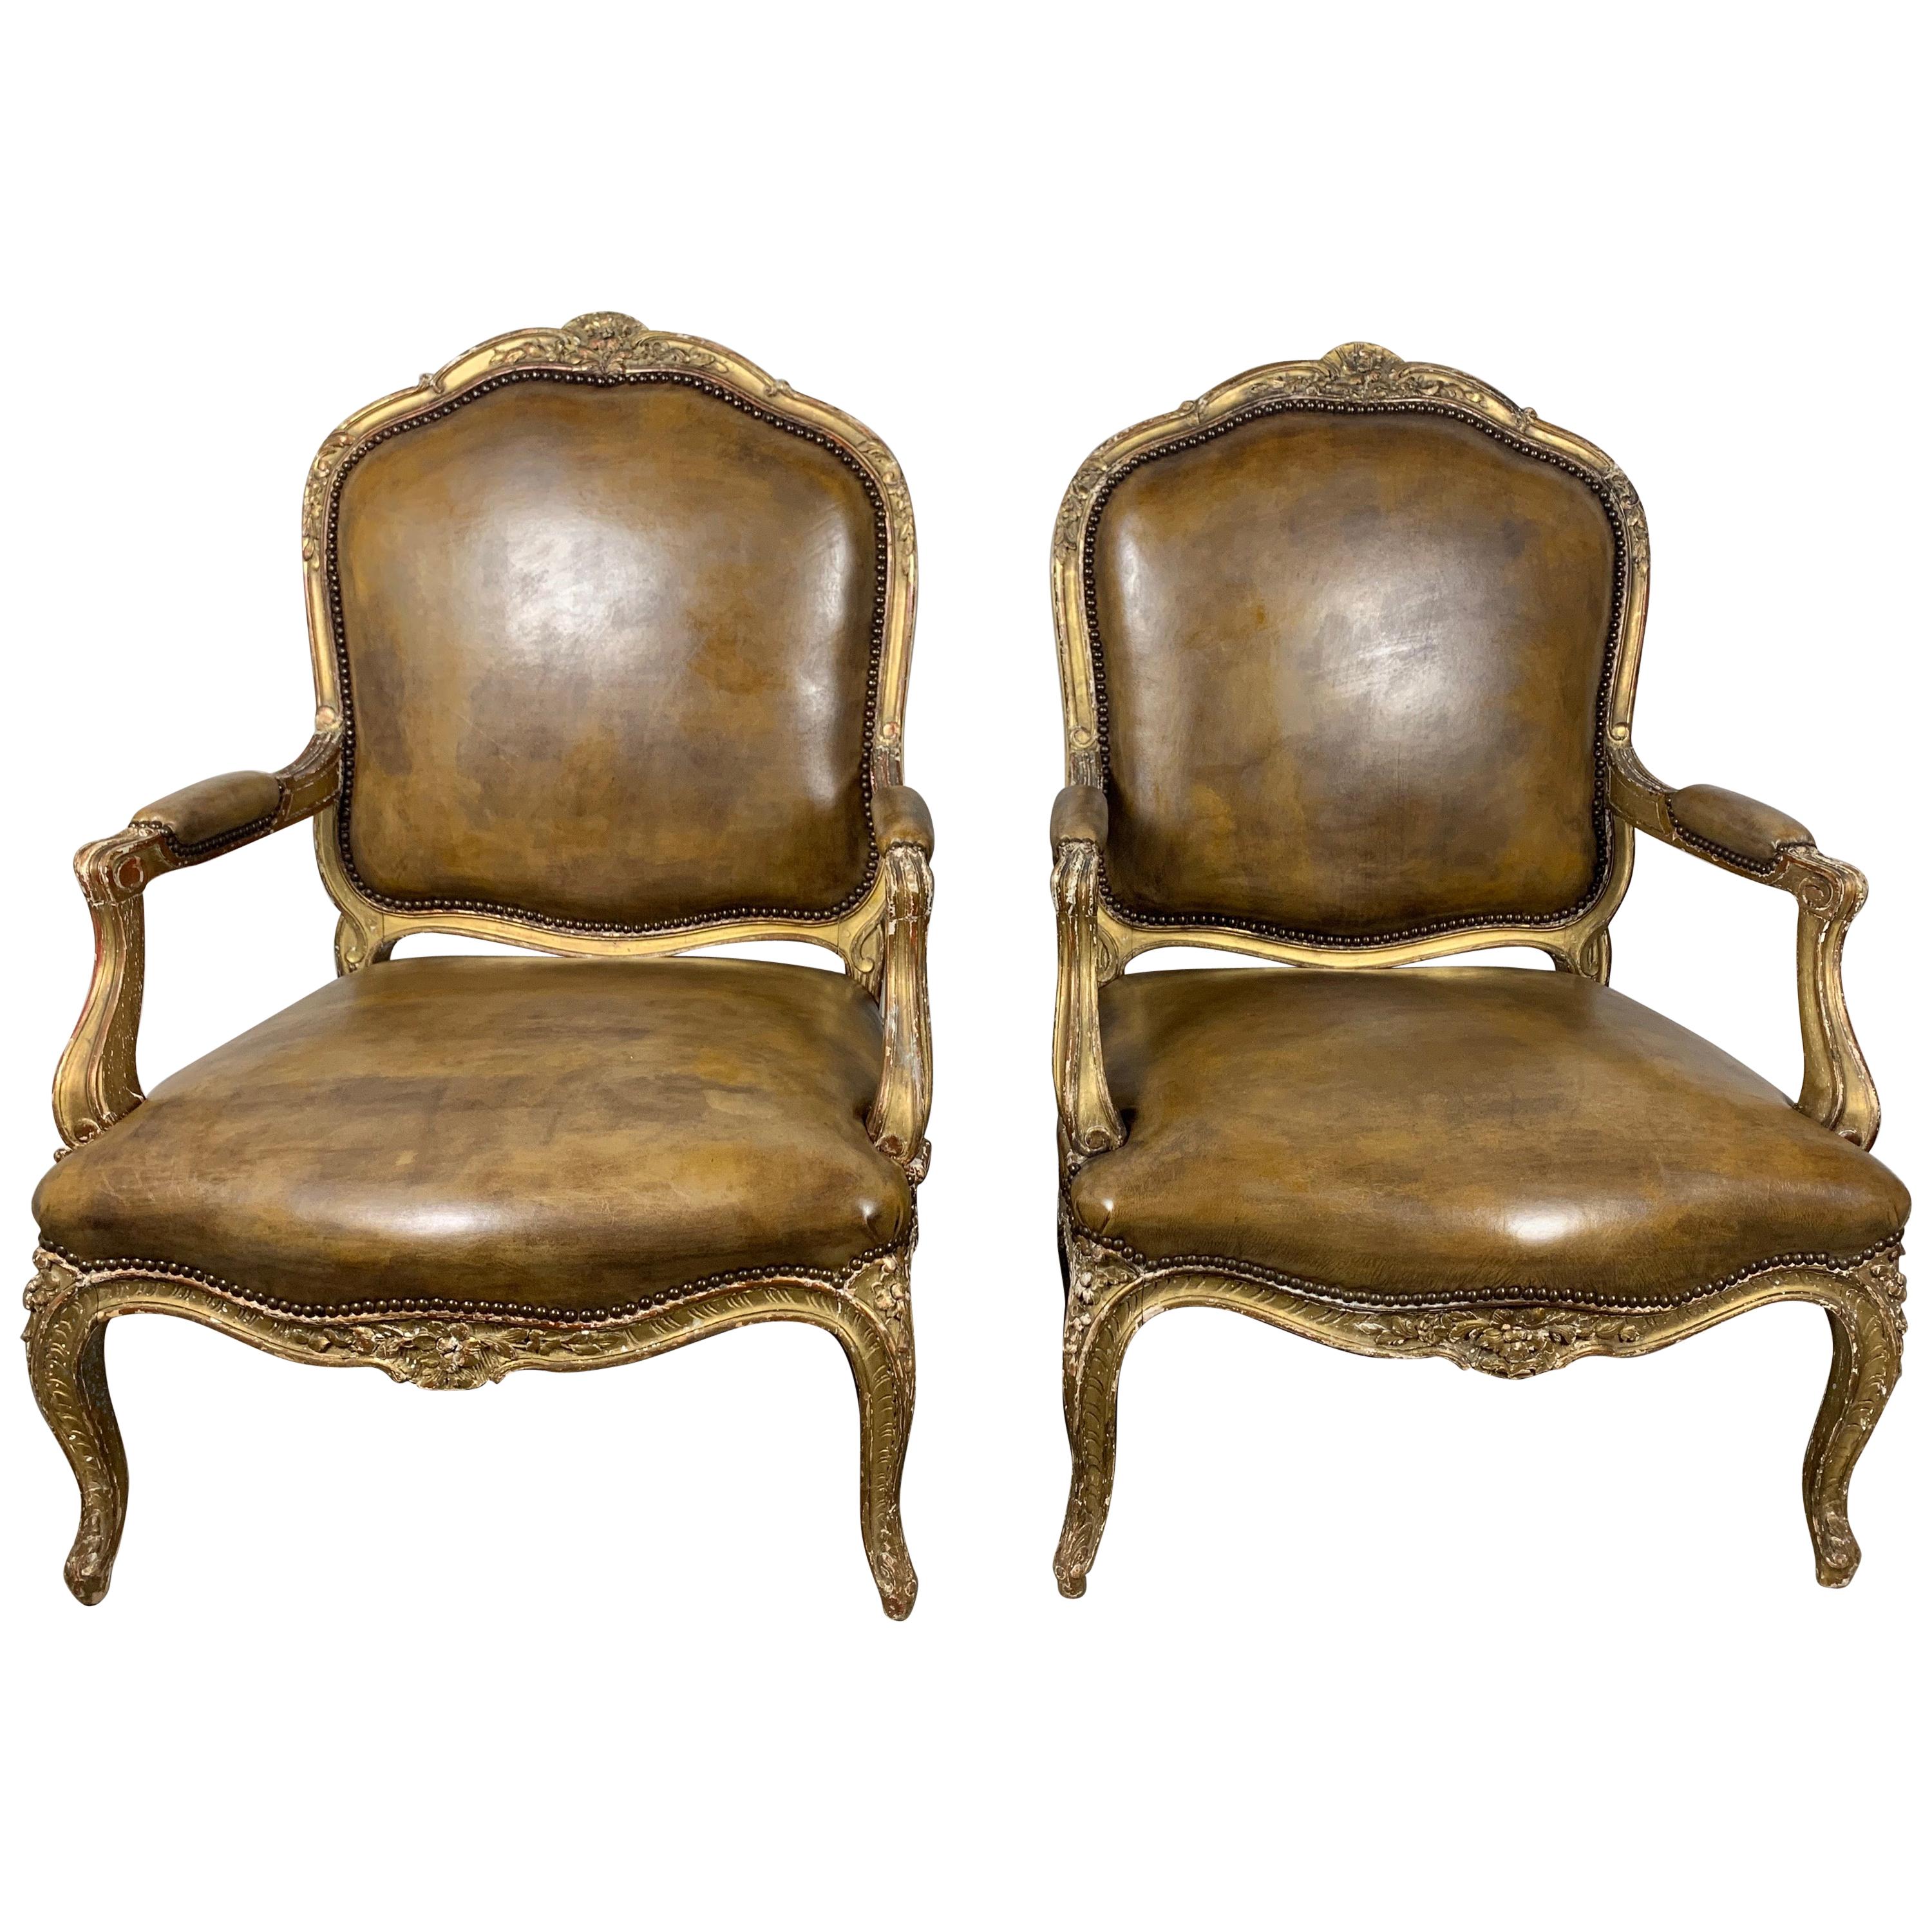 Pair of French Giltwood Armchairs with Leather Upholstery